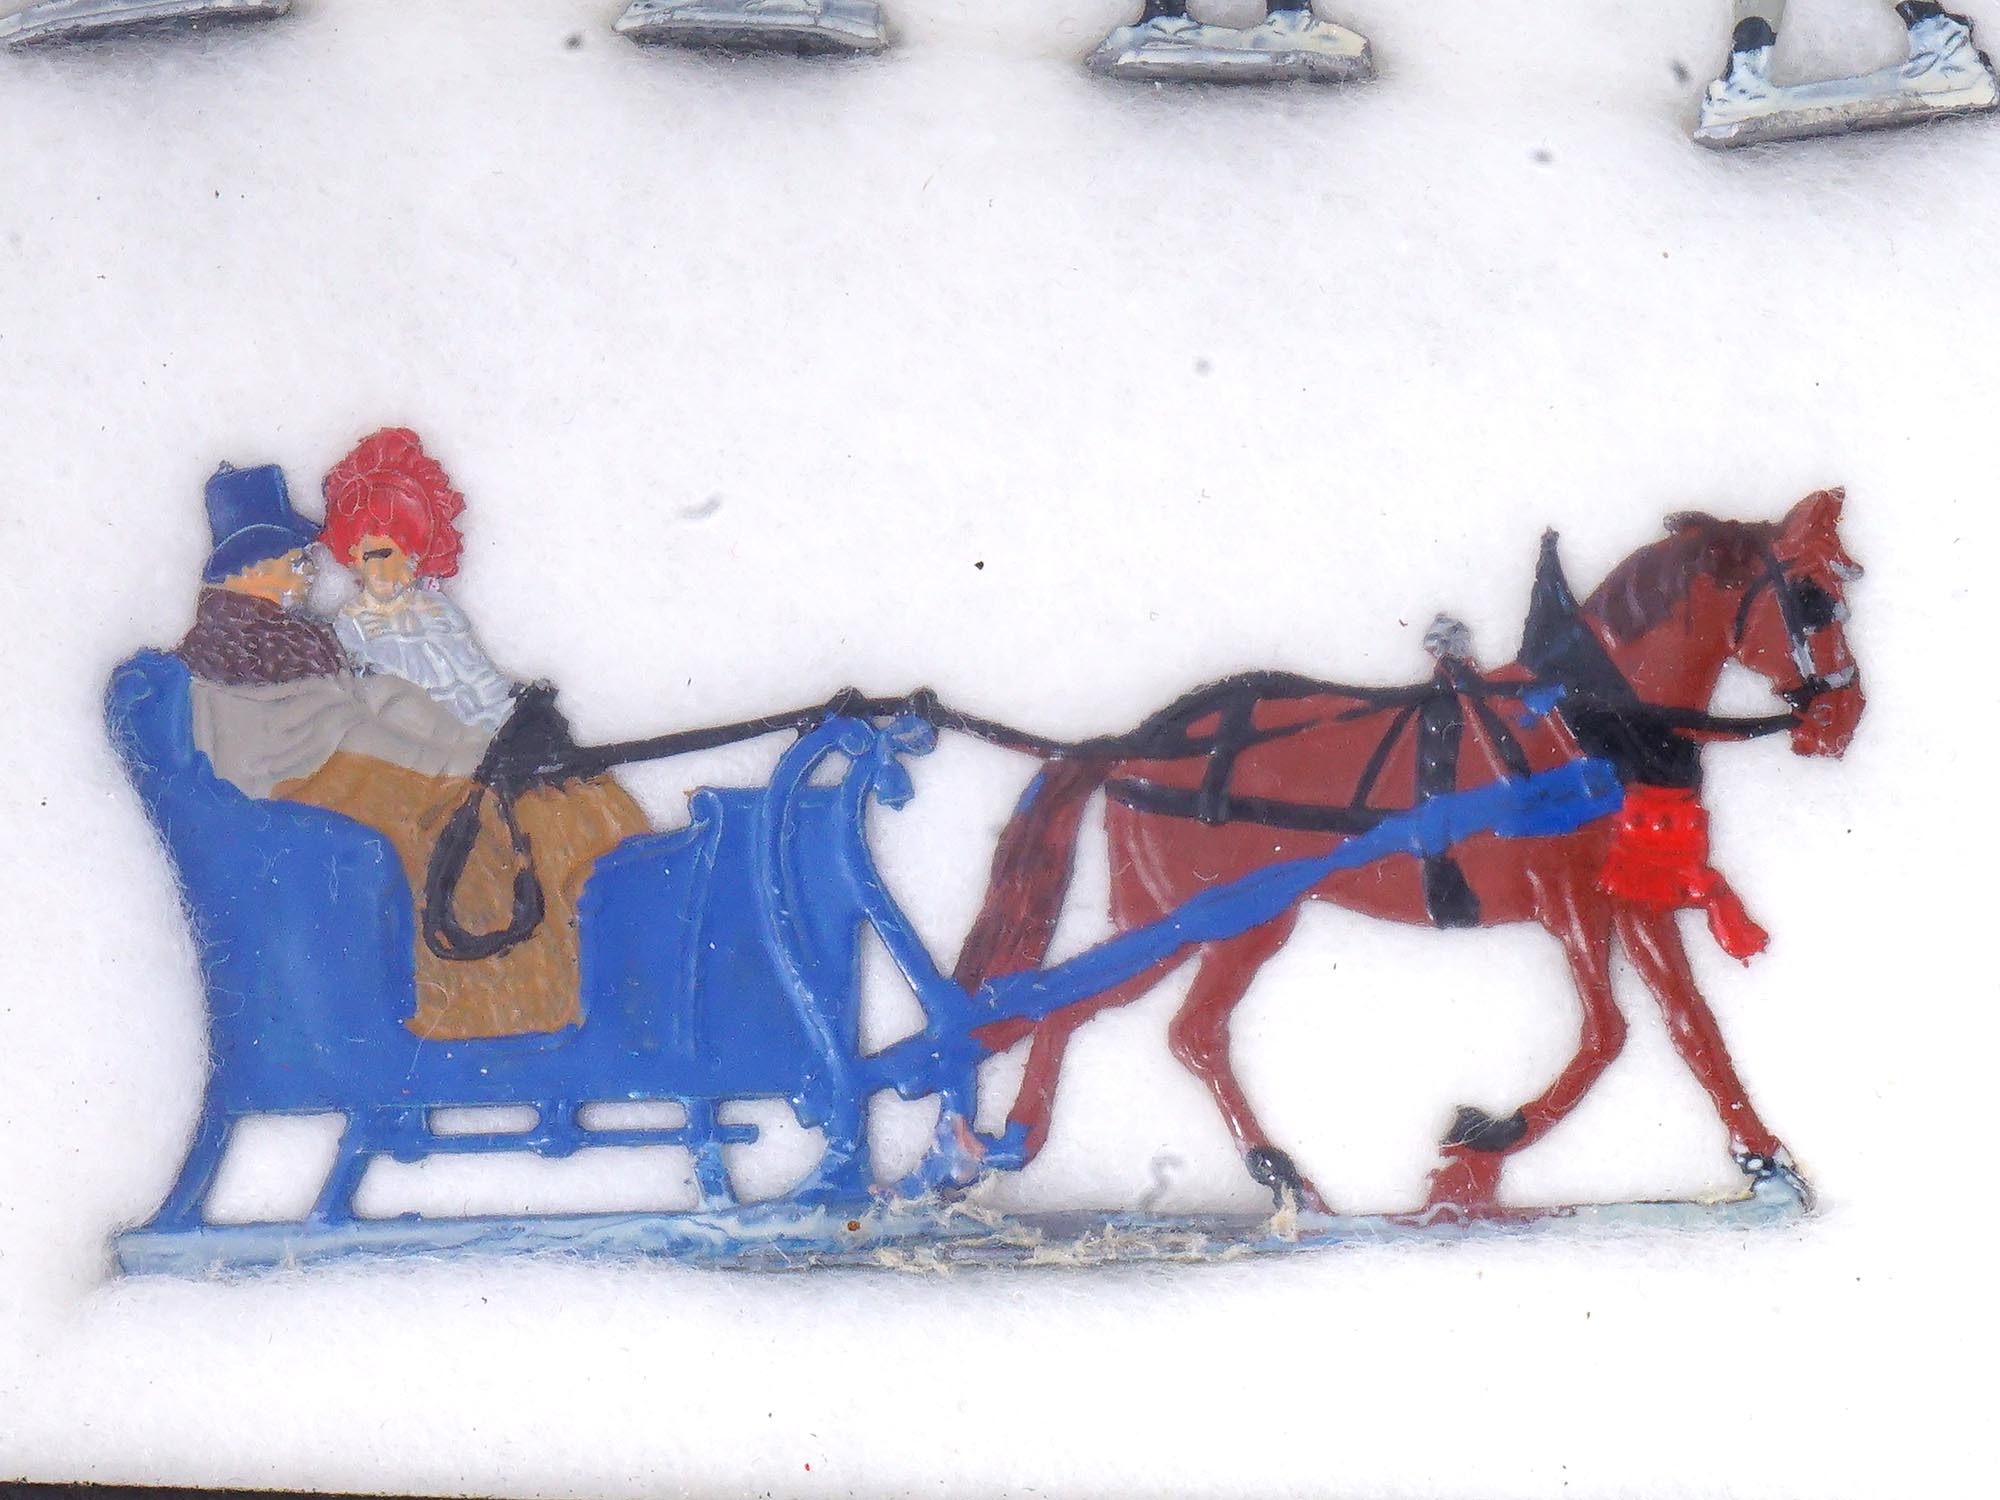 ANTIQUE TOY FIGURINES CHRISTMAS SLEIGH RIDERS SKATERS PIC-6